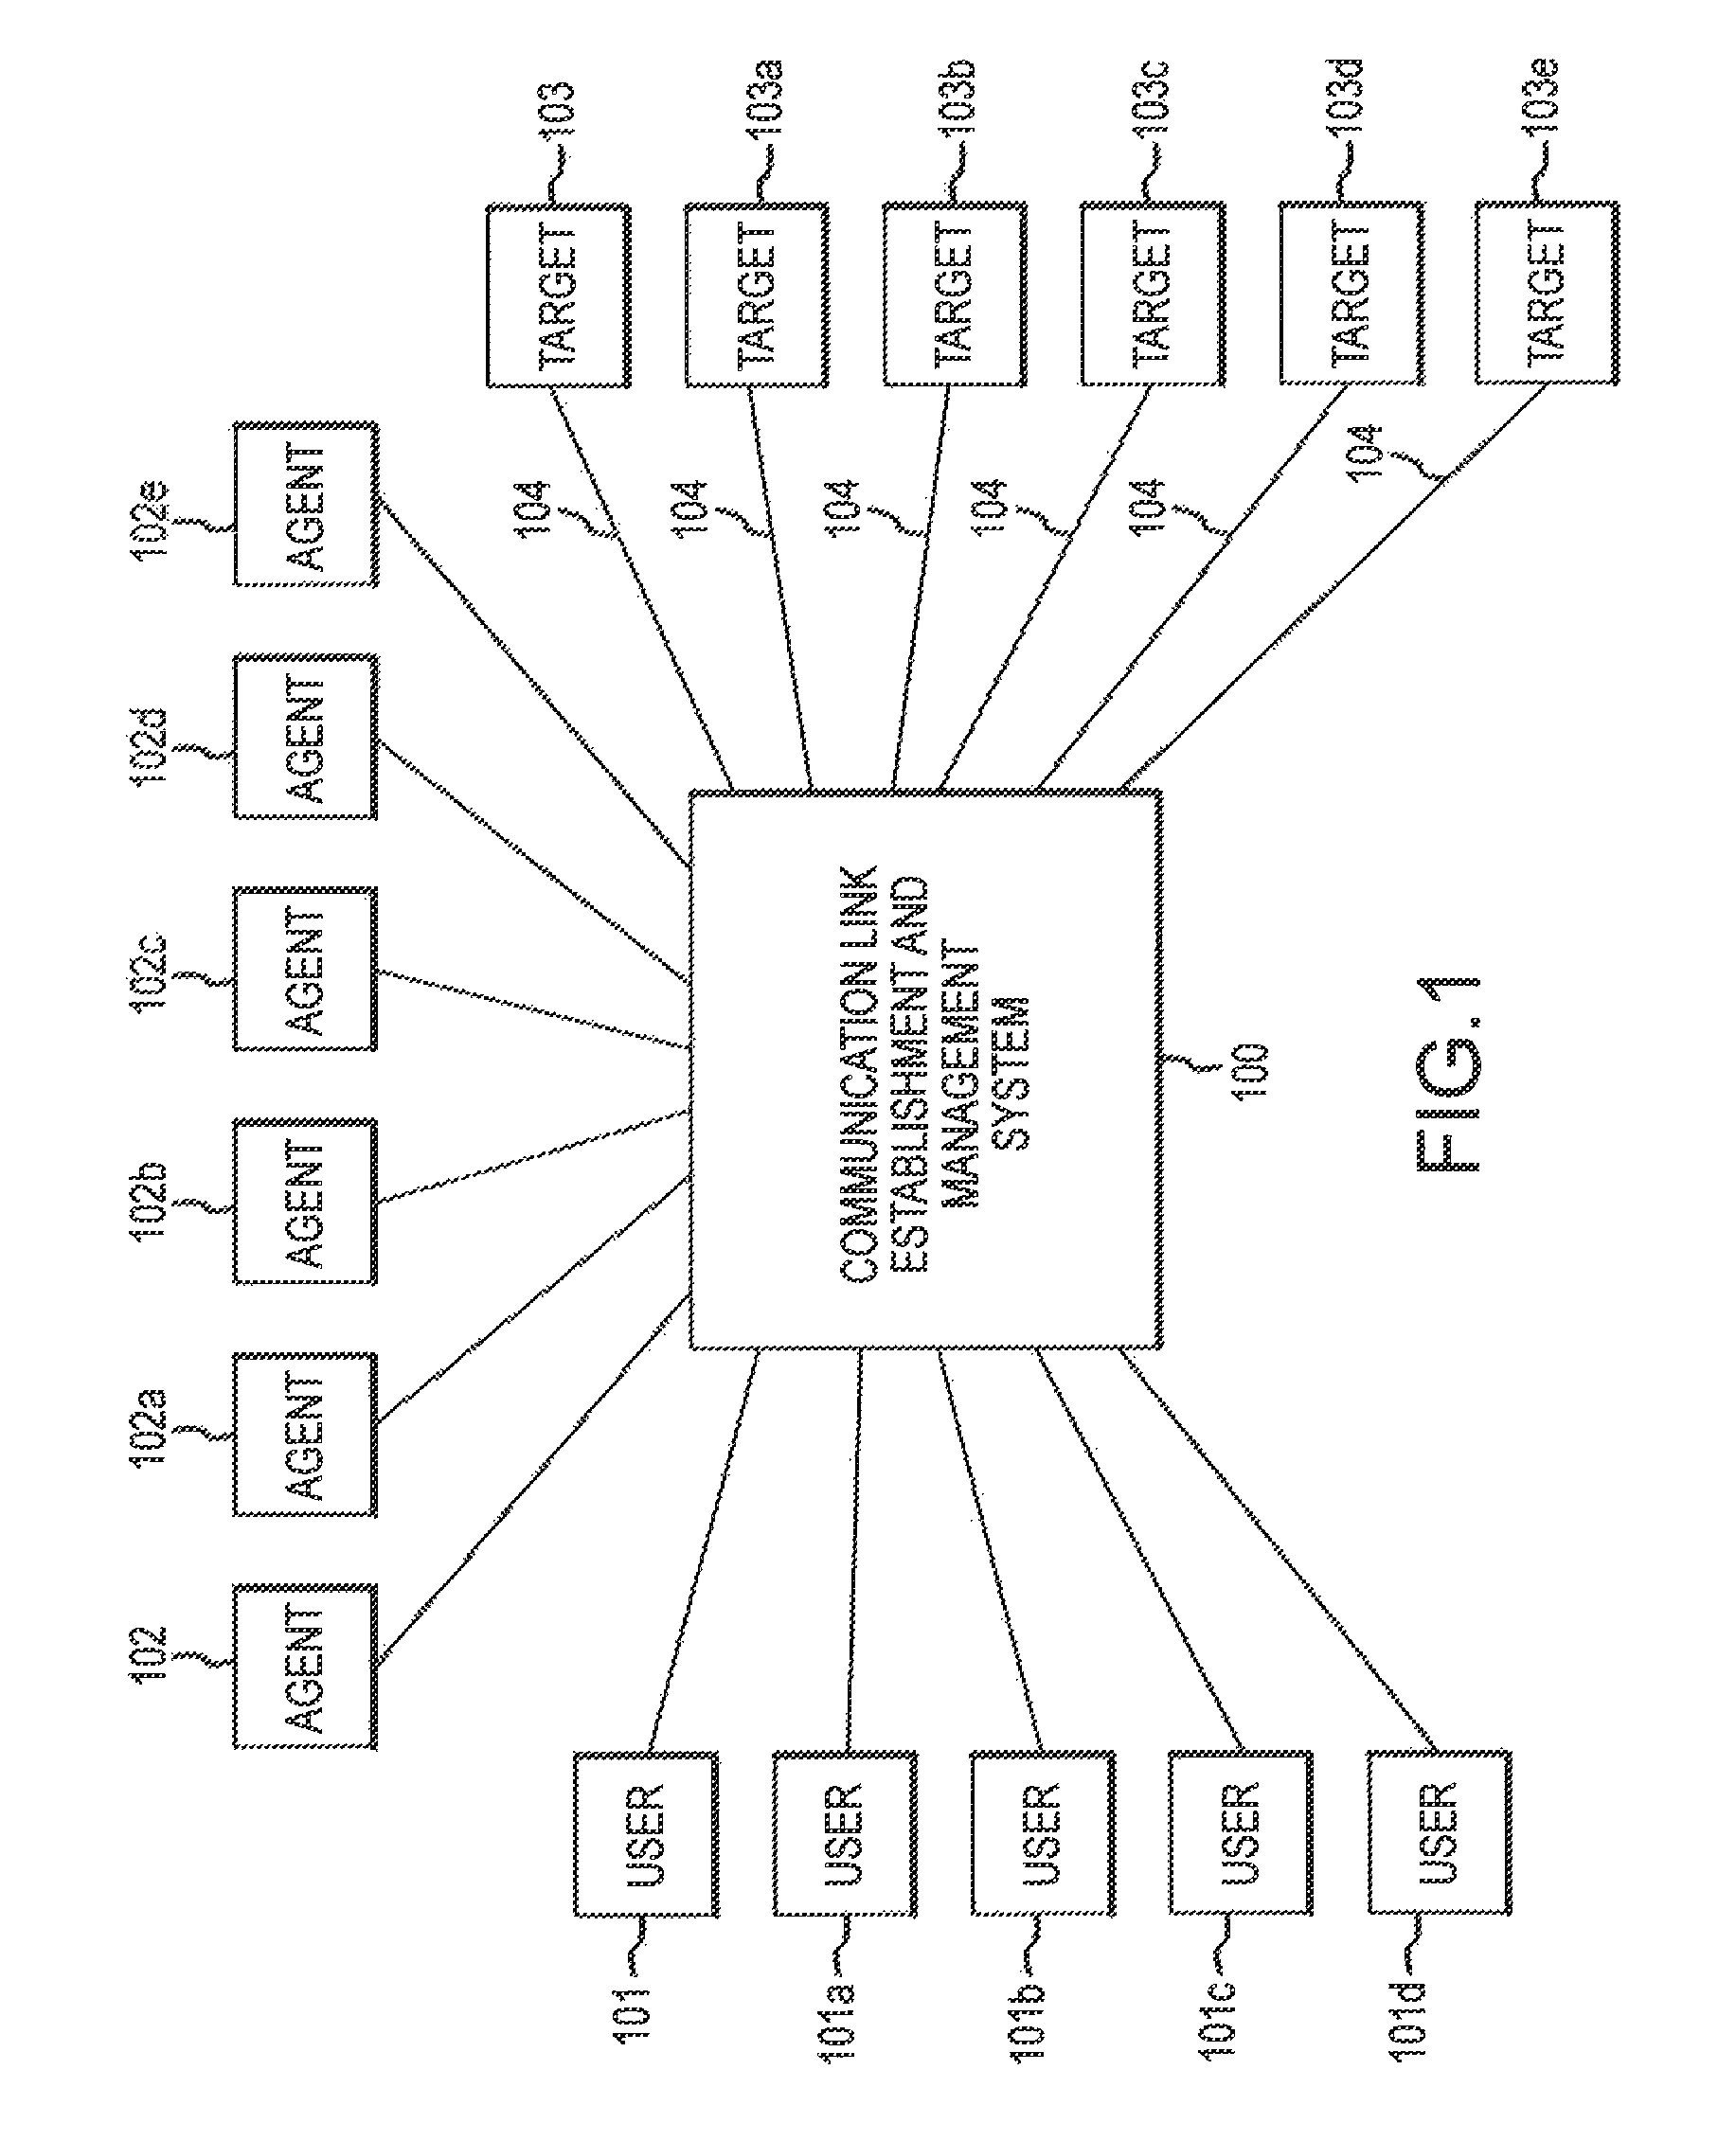 Dynamic allocation of agents for outbound calling in an automated communication link establishment and management system